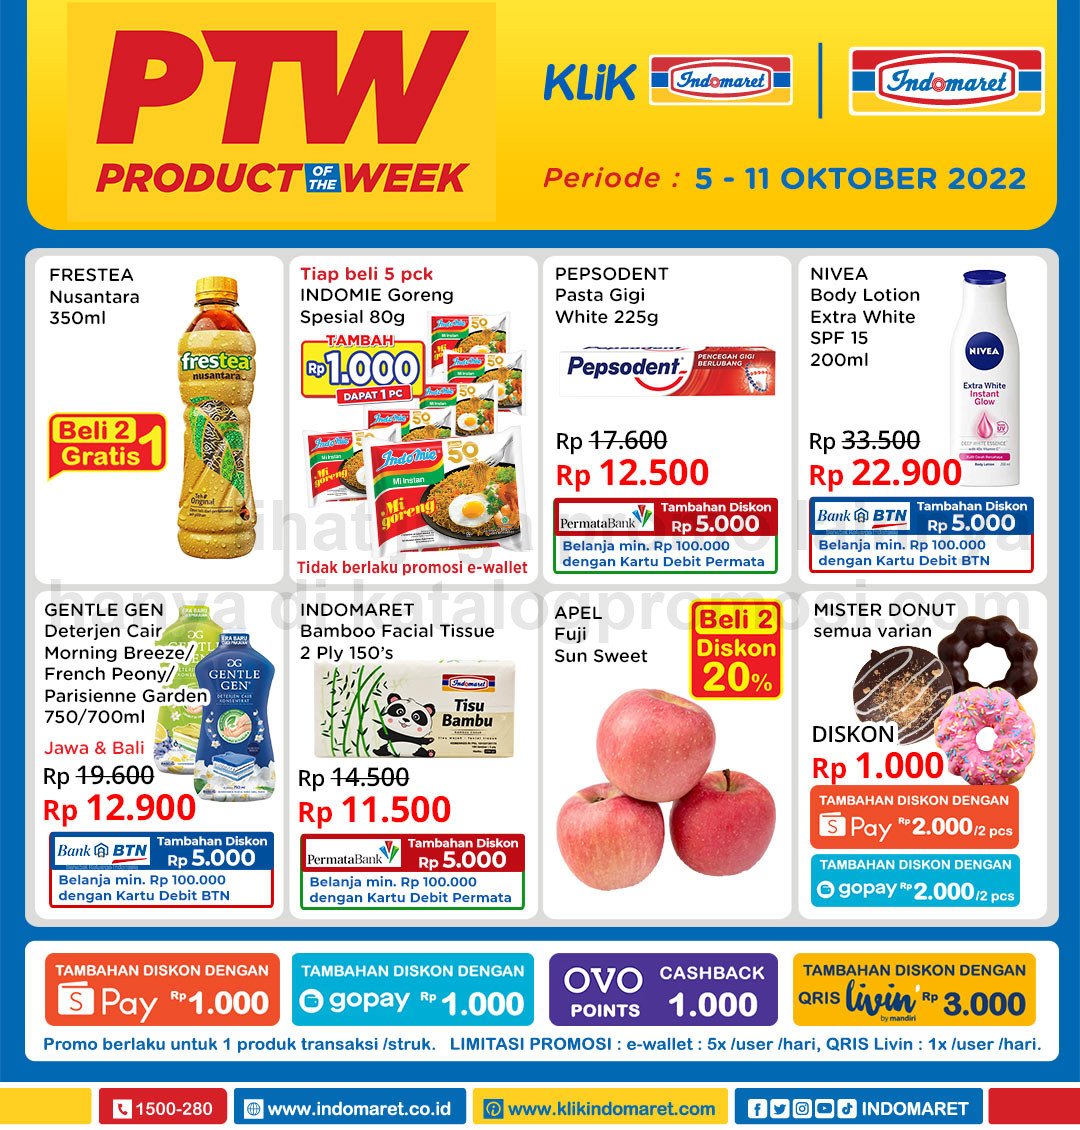 Promo PTW INDOMARET - PRODUCT of The Week periode 05-11 Oktober 2022